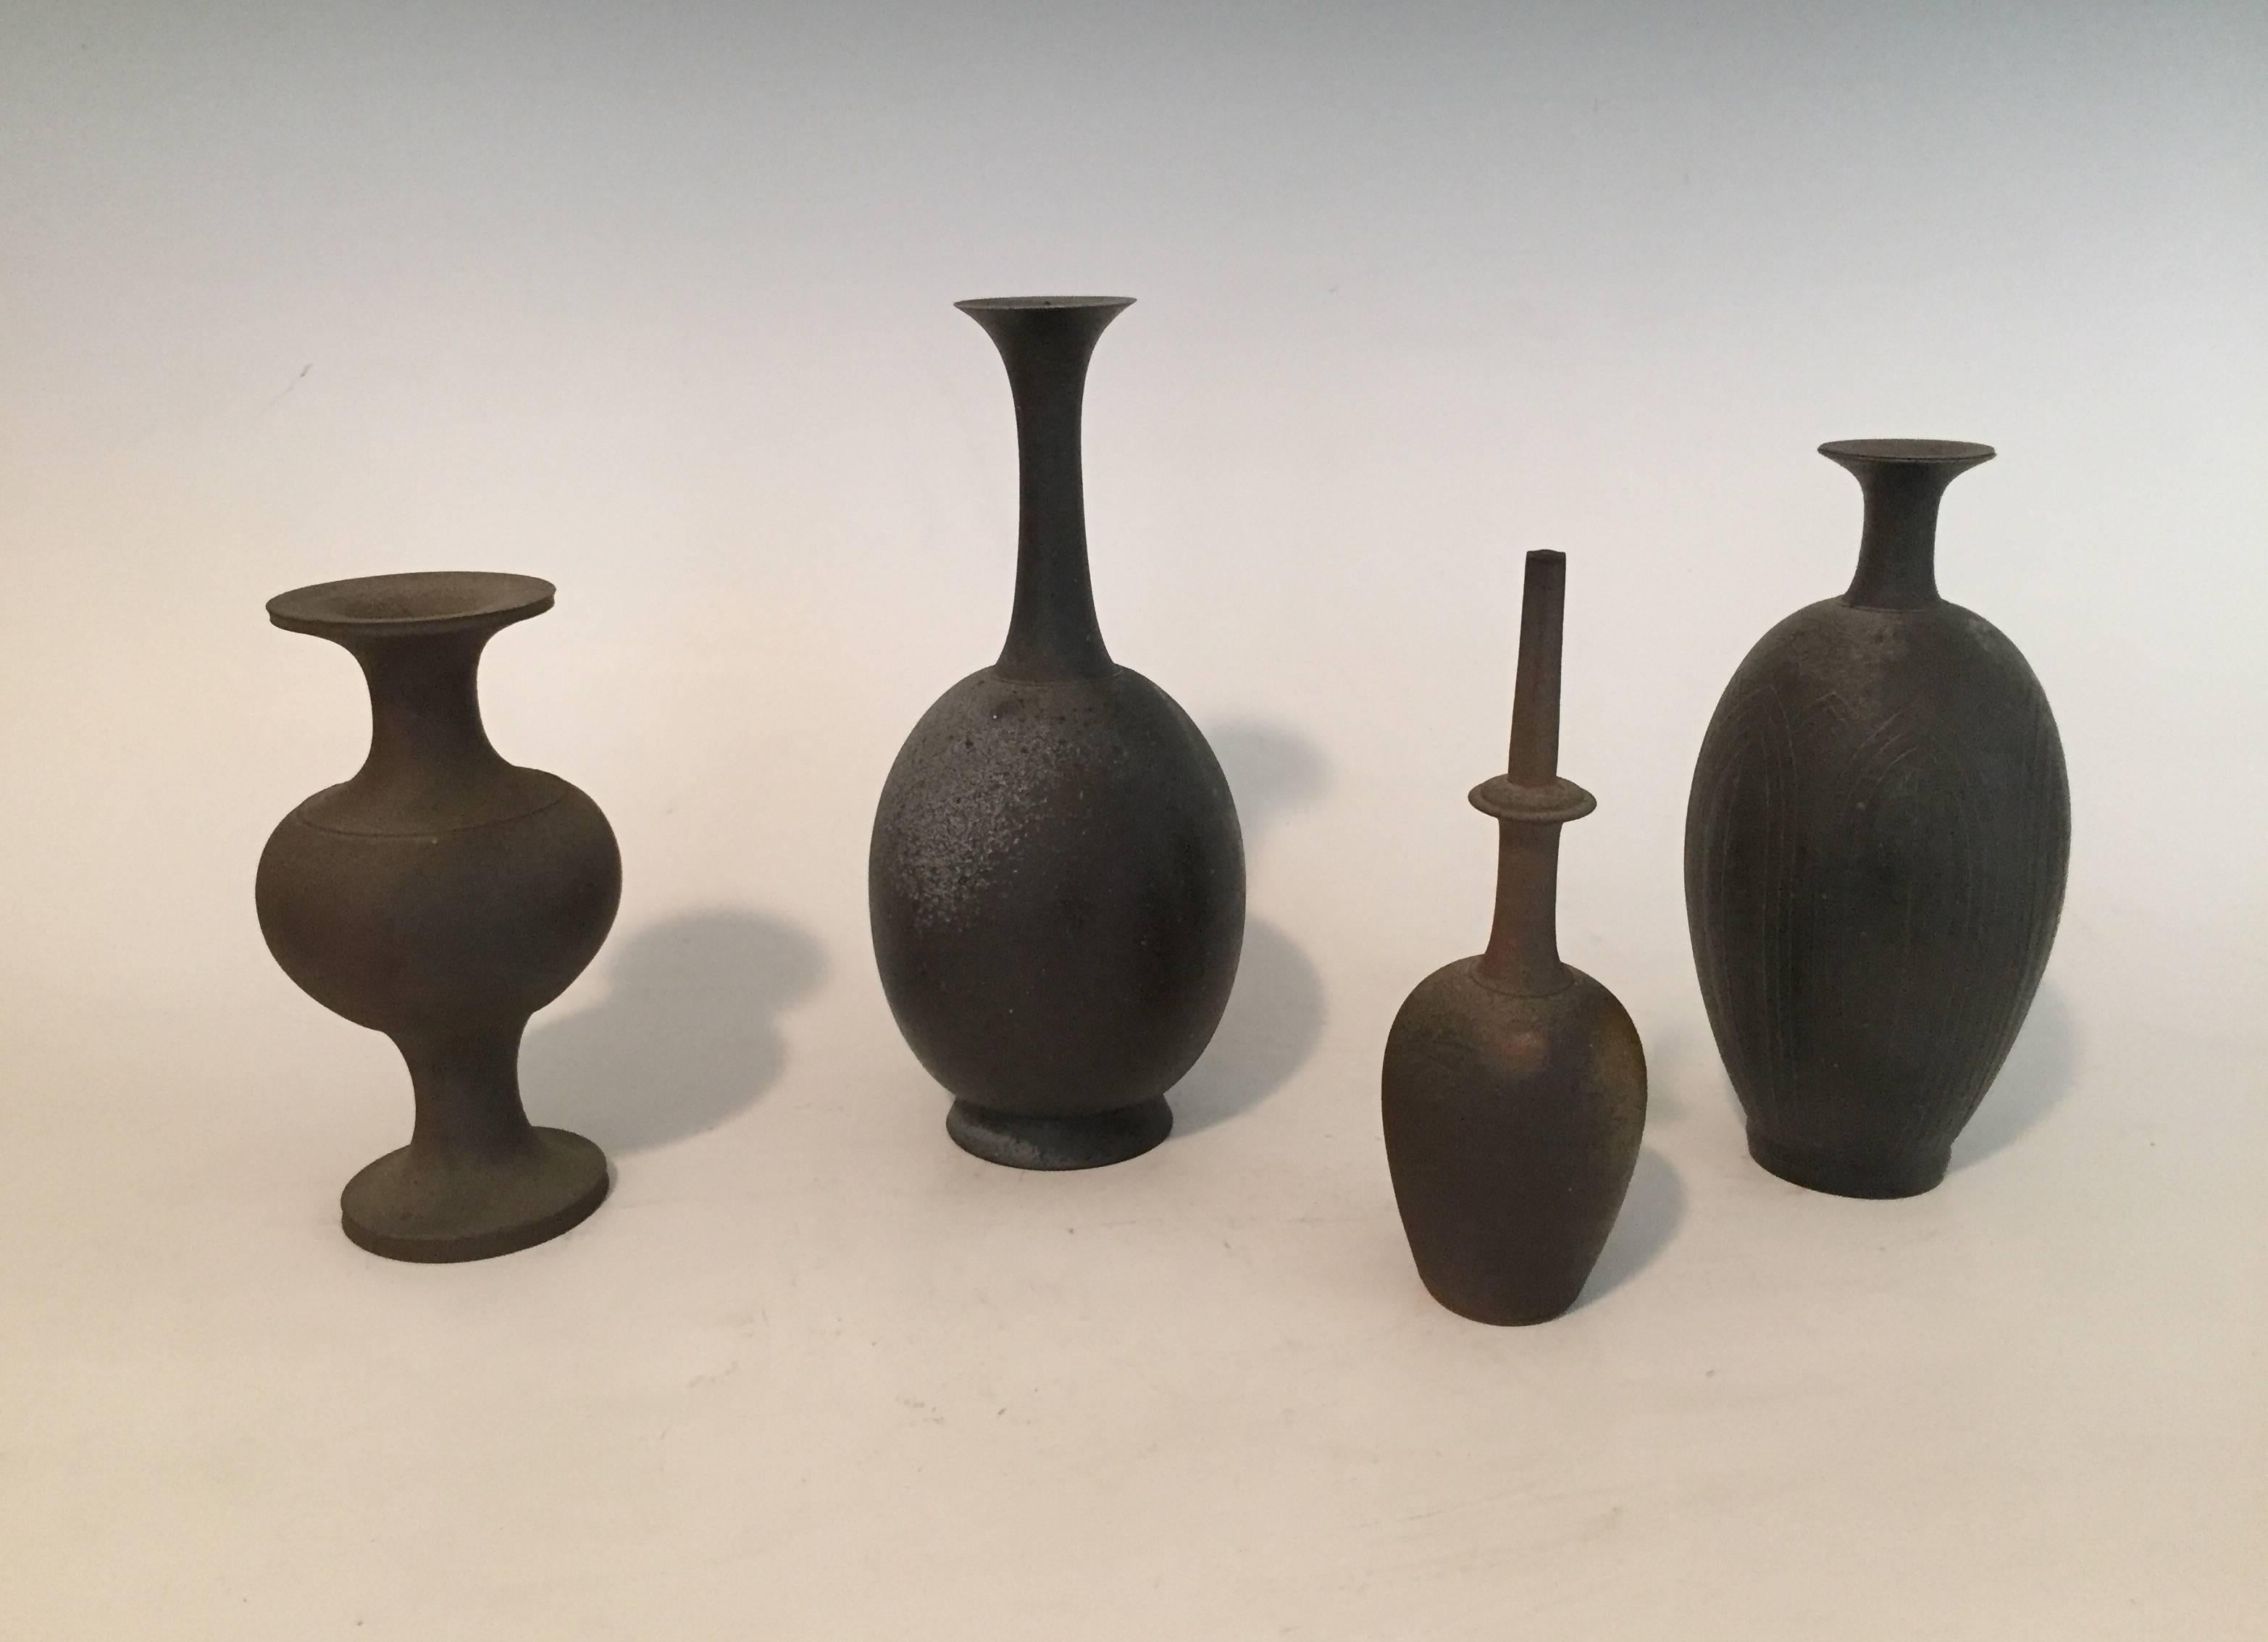 Offered by J R Richards
A group of four distinctive stoneware vases by Japanese Ceramist Koji Toda (born 1974-).
Beautiful hand thrown and each unique. It was Toda’s encounter with pre -12th century bronze water pitchers that inspired him to create